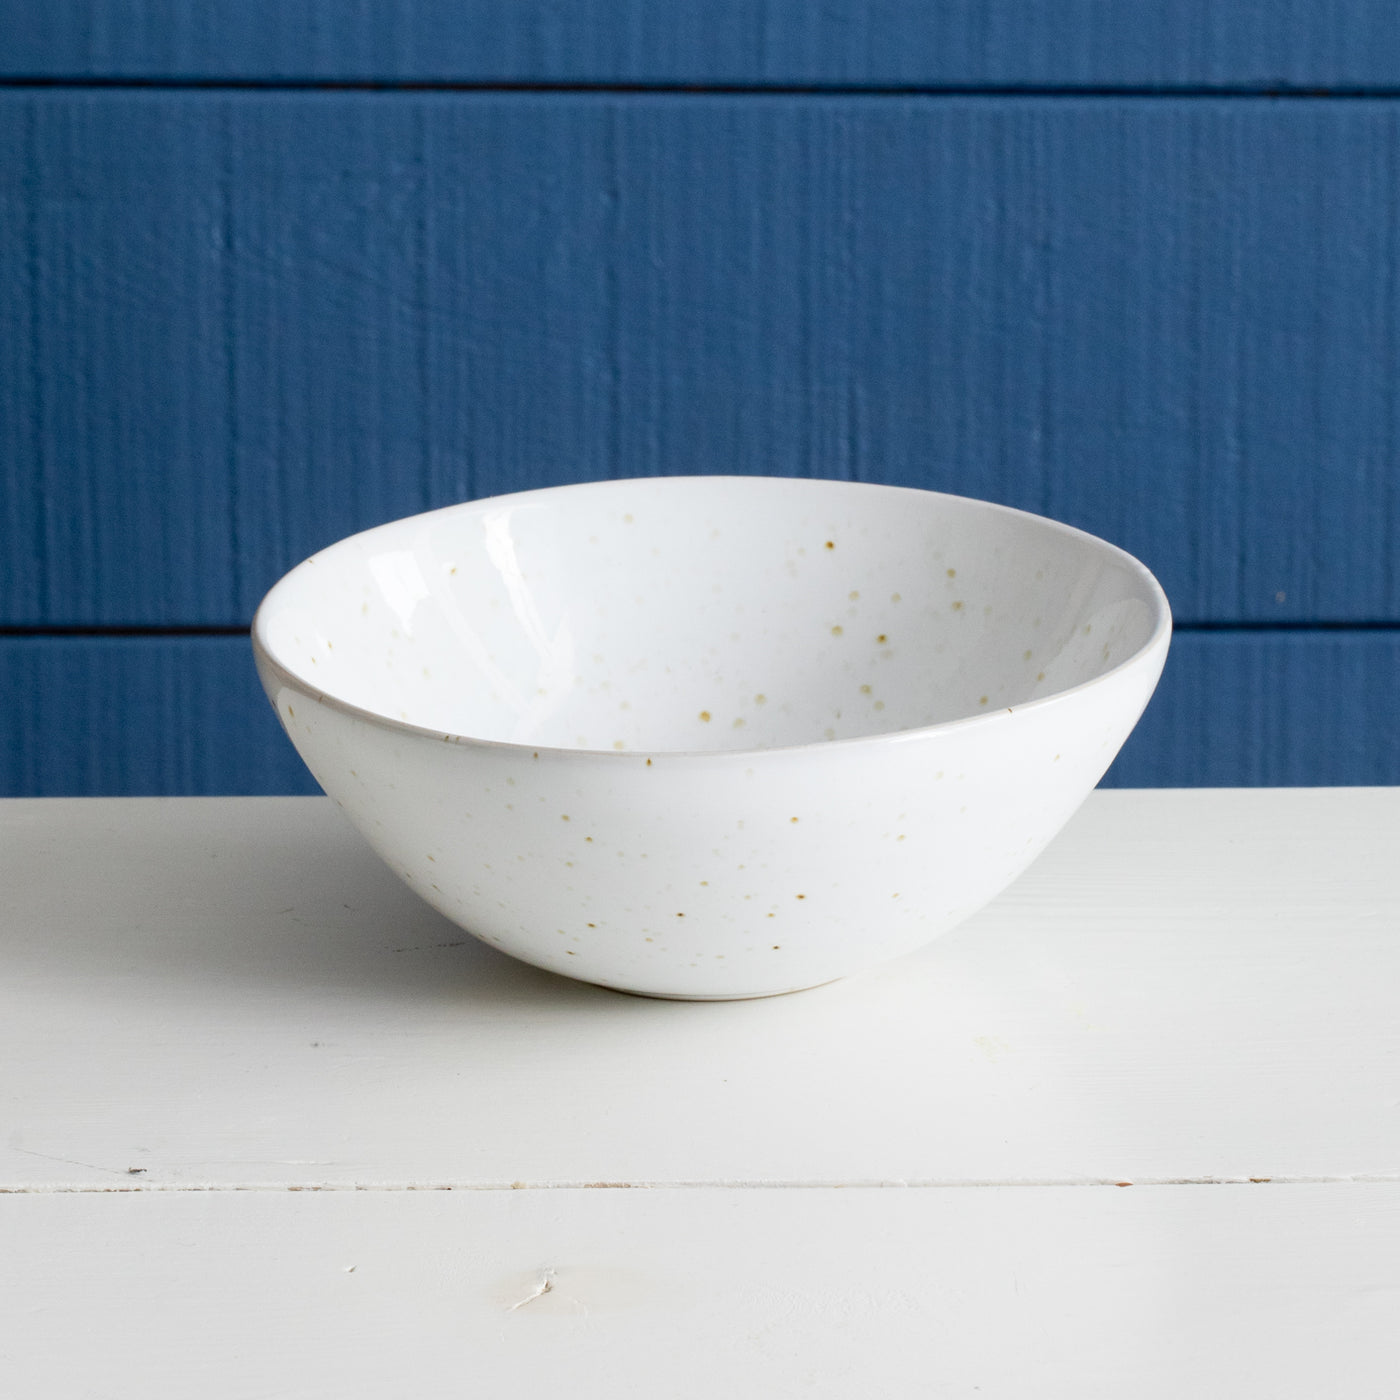 Muesli Bowl Cereal Bowl in reactive white glaze with spots organic shape